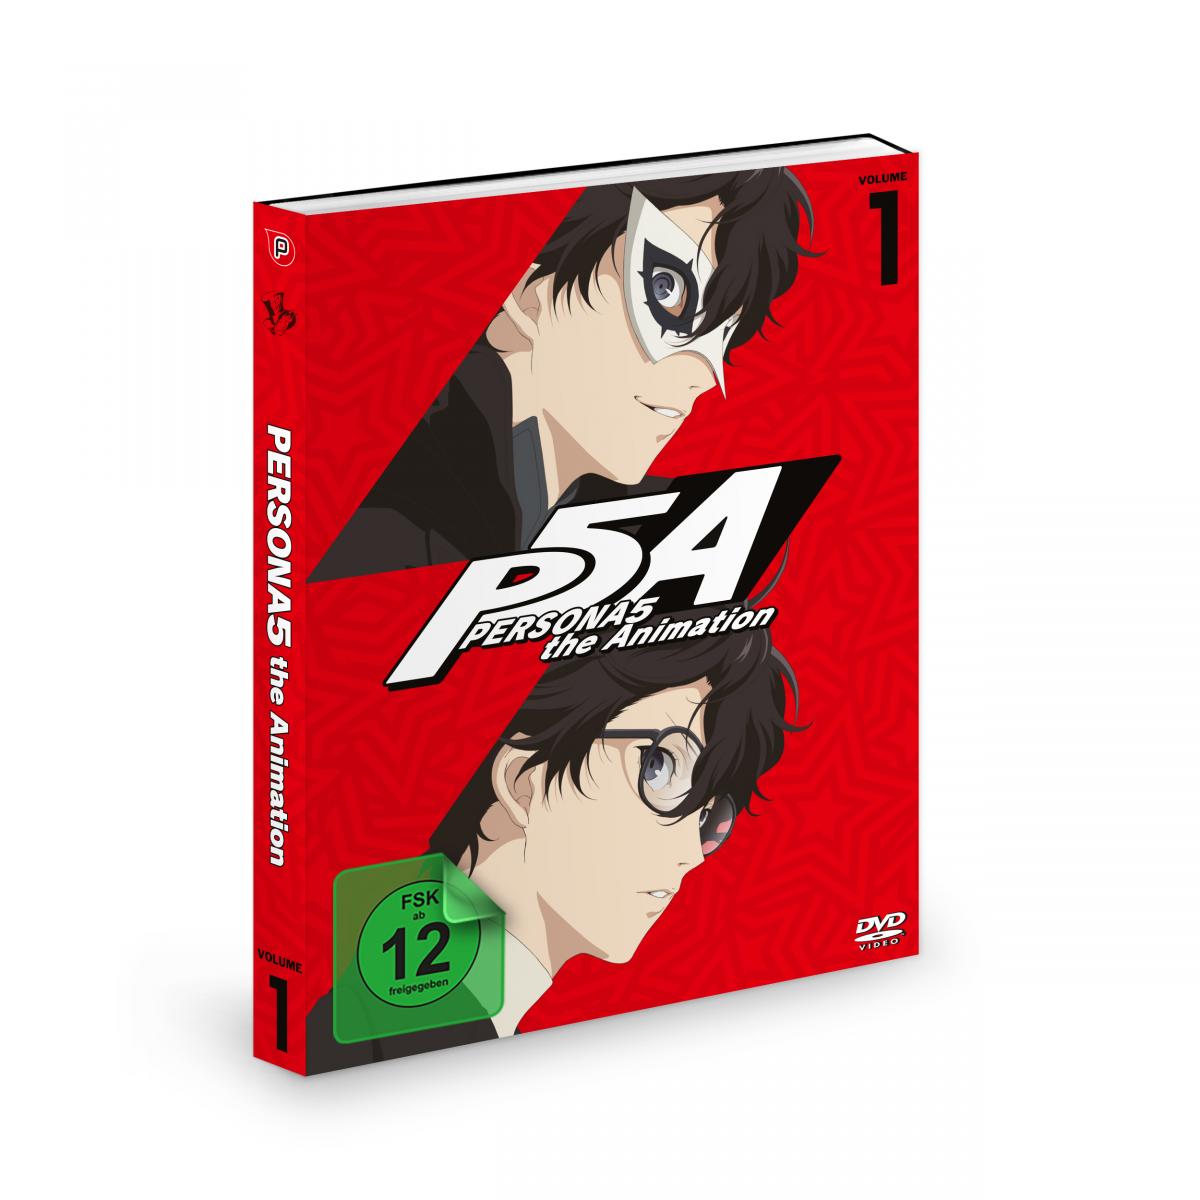 Persona5 - The Animation - Volume 1 [DVD] Image 2